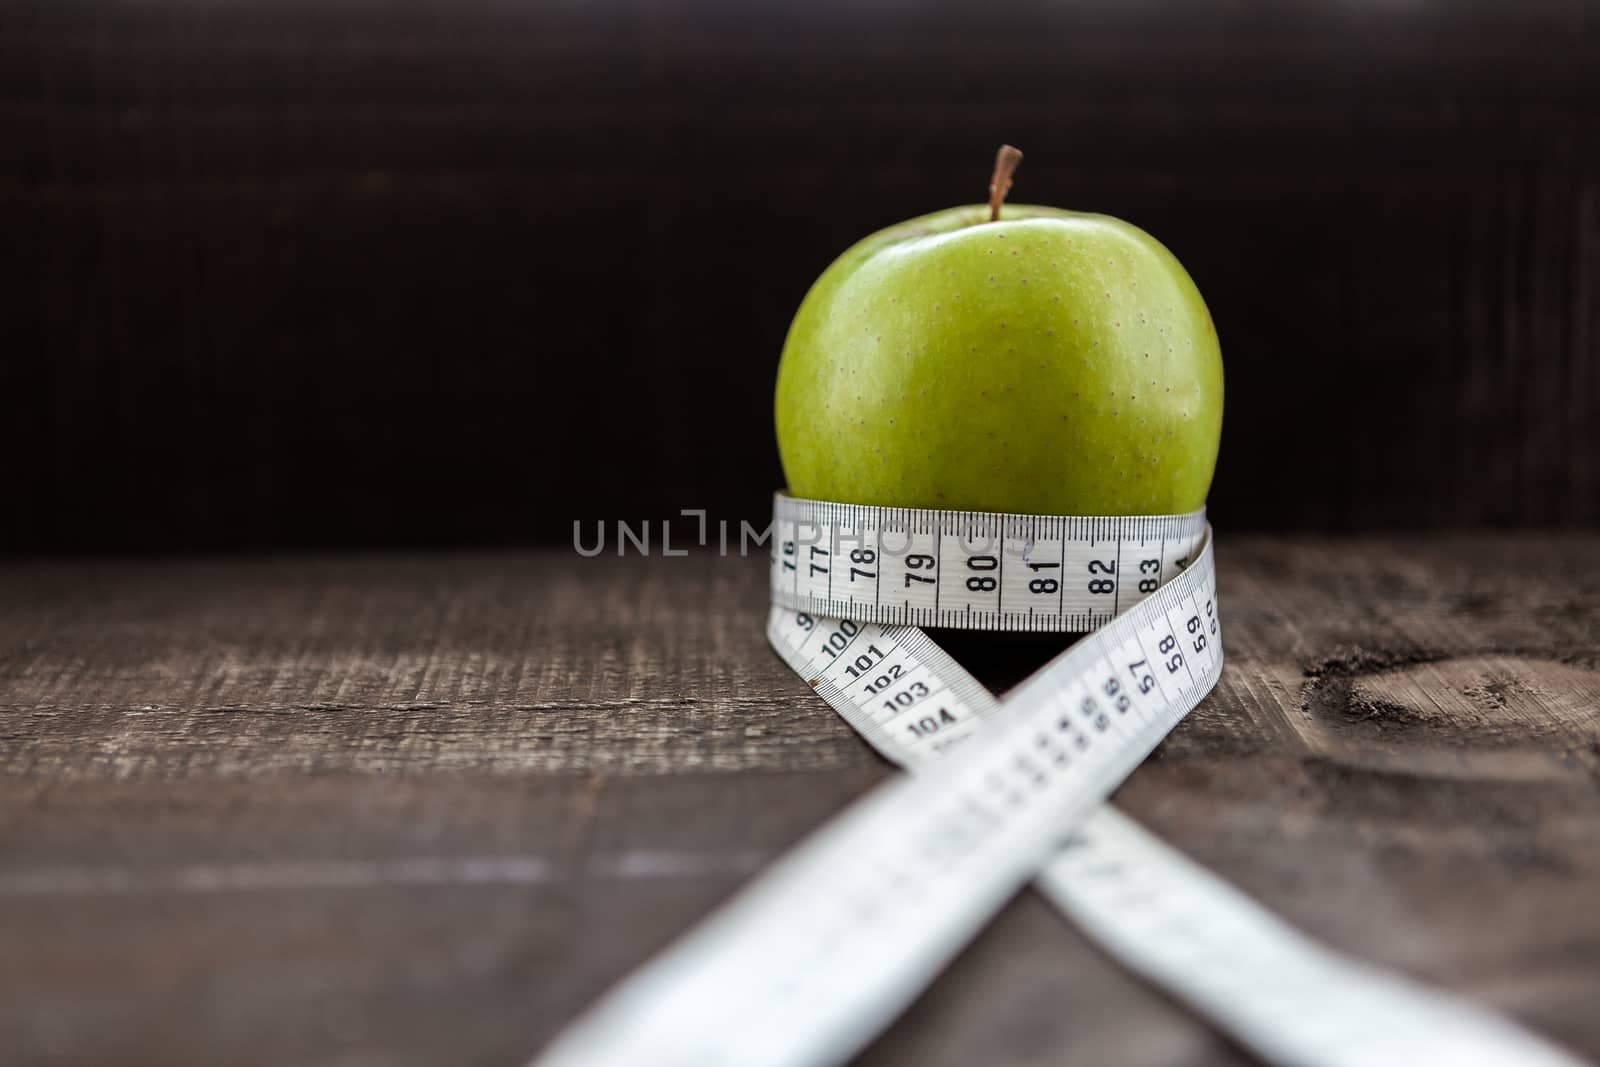 The image shows apple surrounded by a measuring tape referring to diet and health concept on wooden background